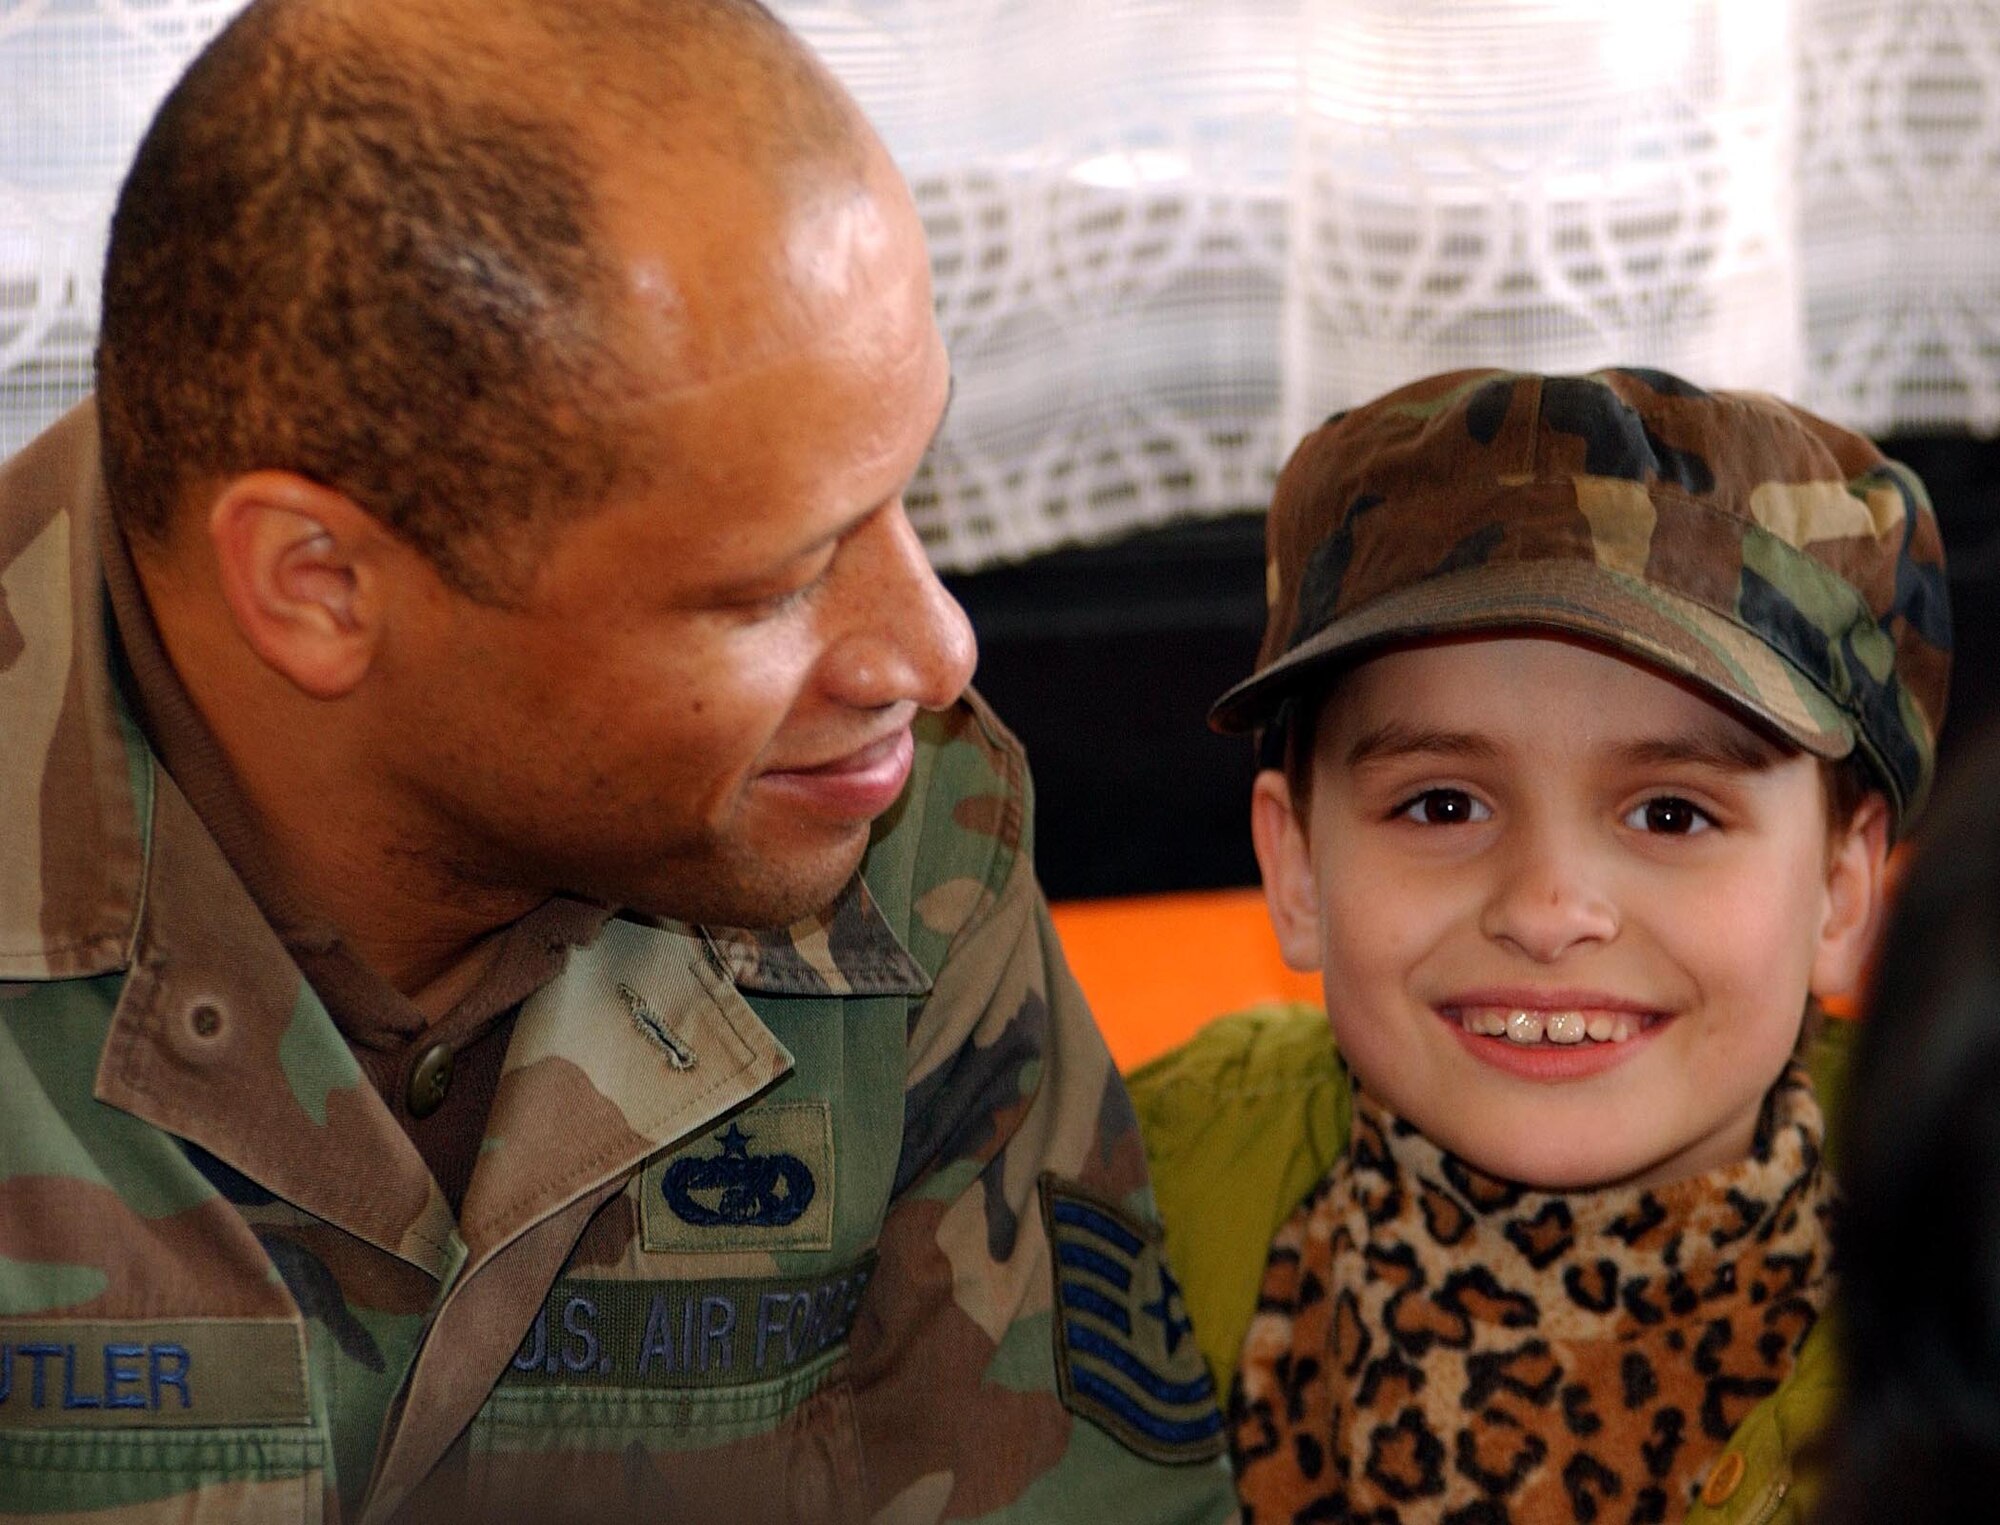 OPERATION IRAQI FREEDOM -- Tech. Sgt. Terrance Butler shares his hat with a Bulgarian child April 2. Butler is currently assigned to the 409th Air Expeditionary Group at Camp Sarafovo, Bulgaria. More than 40 children from two orphanages in nearby Burgas toured the camp and entertained the deployed troops. (U.S. Air Force photo by Master Sgt. Dave Ahlschwede) 
